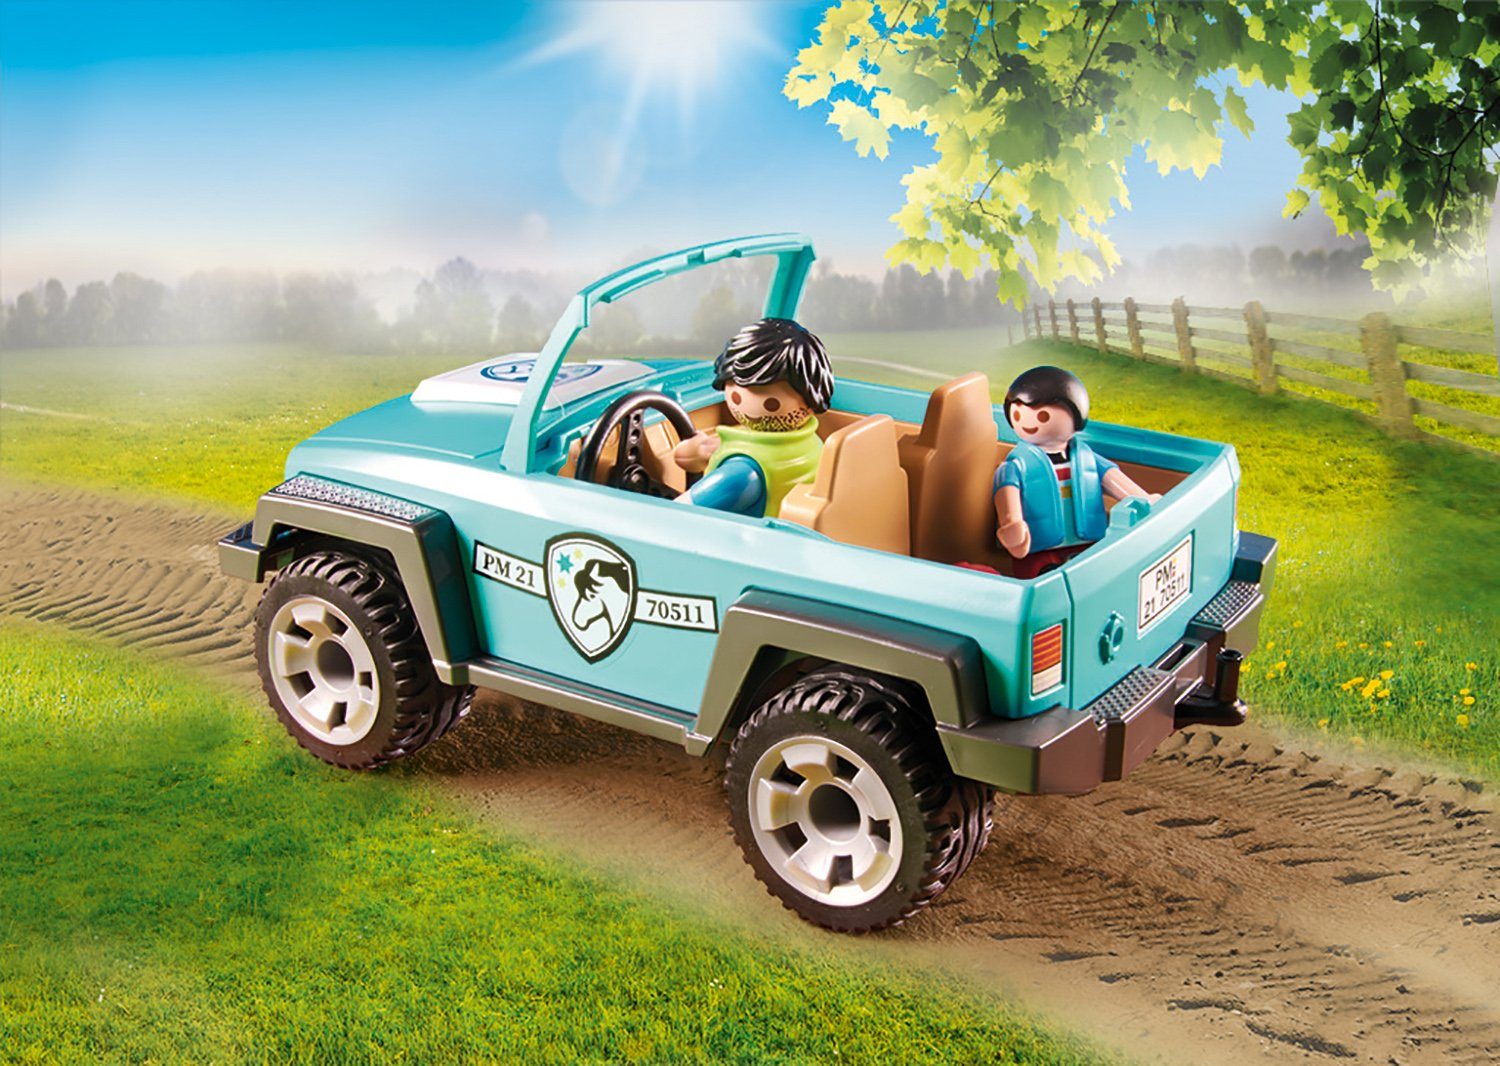 Playmobil® Country, Made Germany (44 St), mit in PKW Konstruktions-Spielset Ponyanhänger (70511),